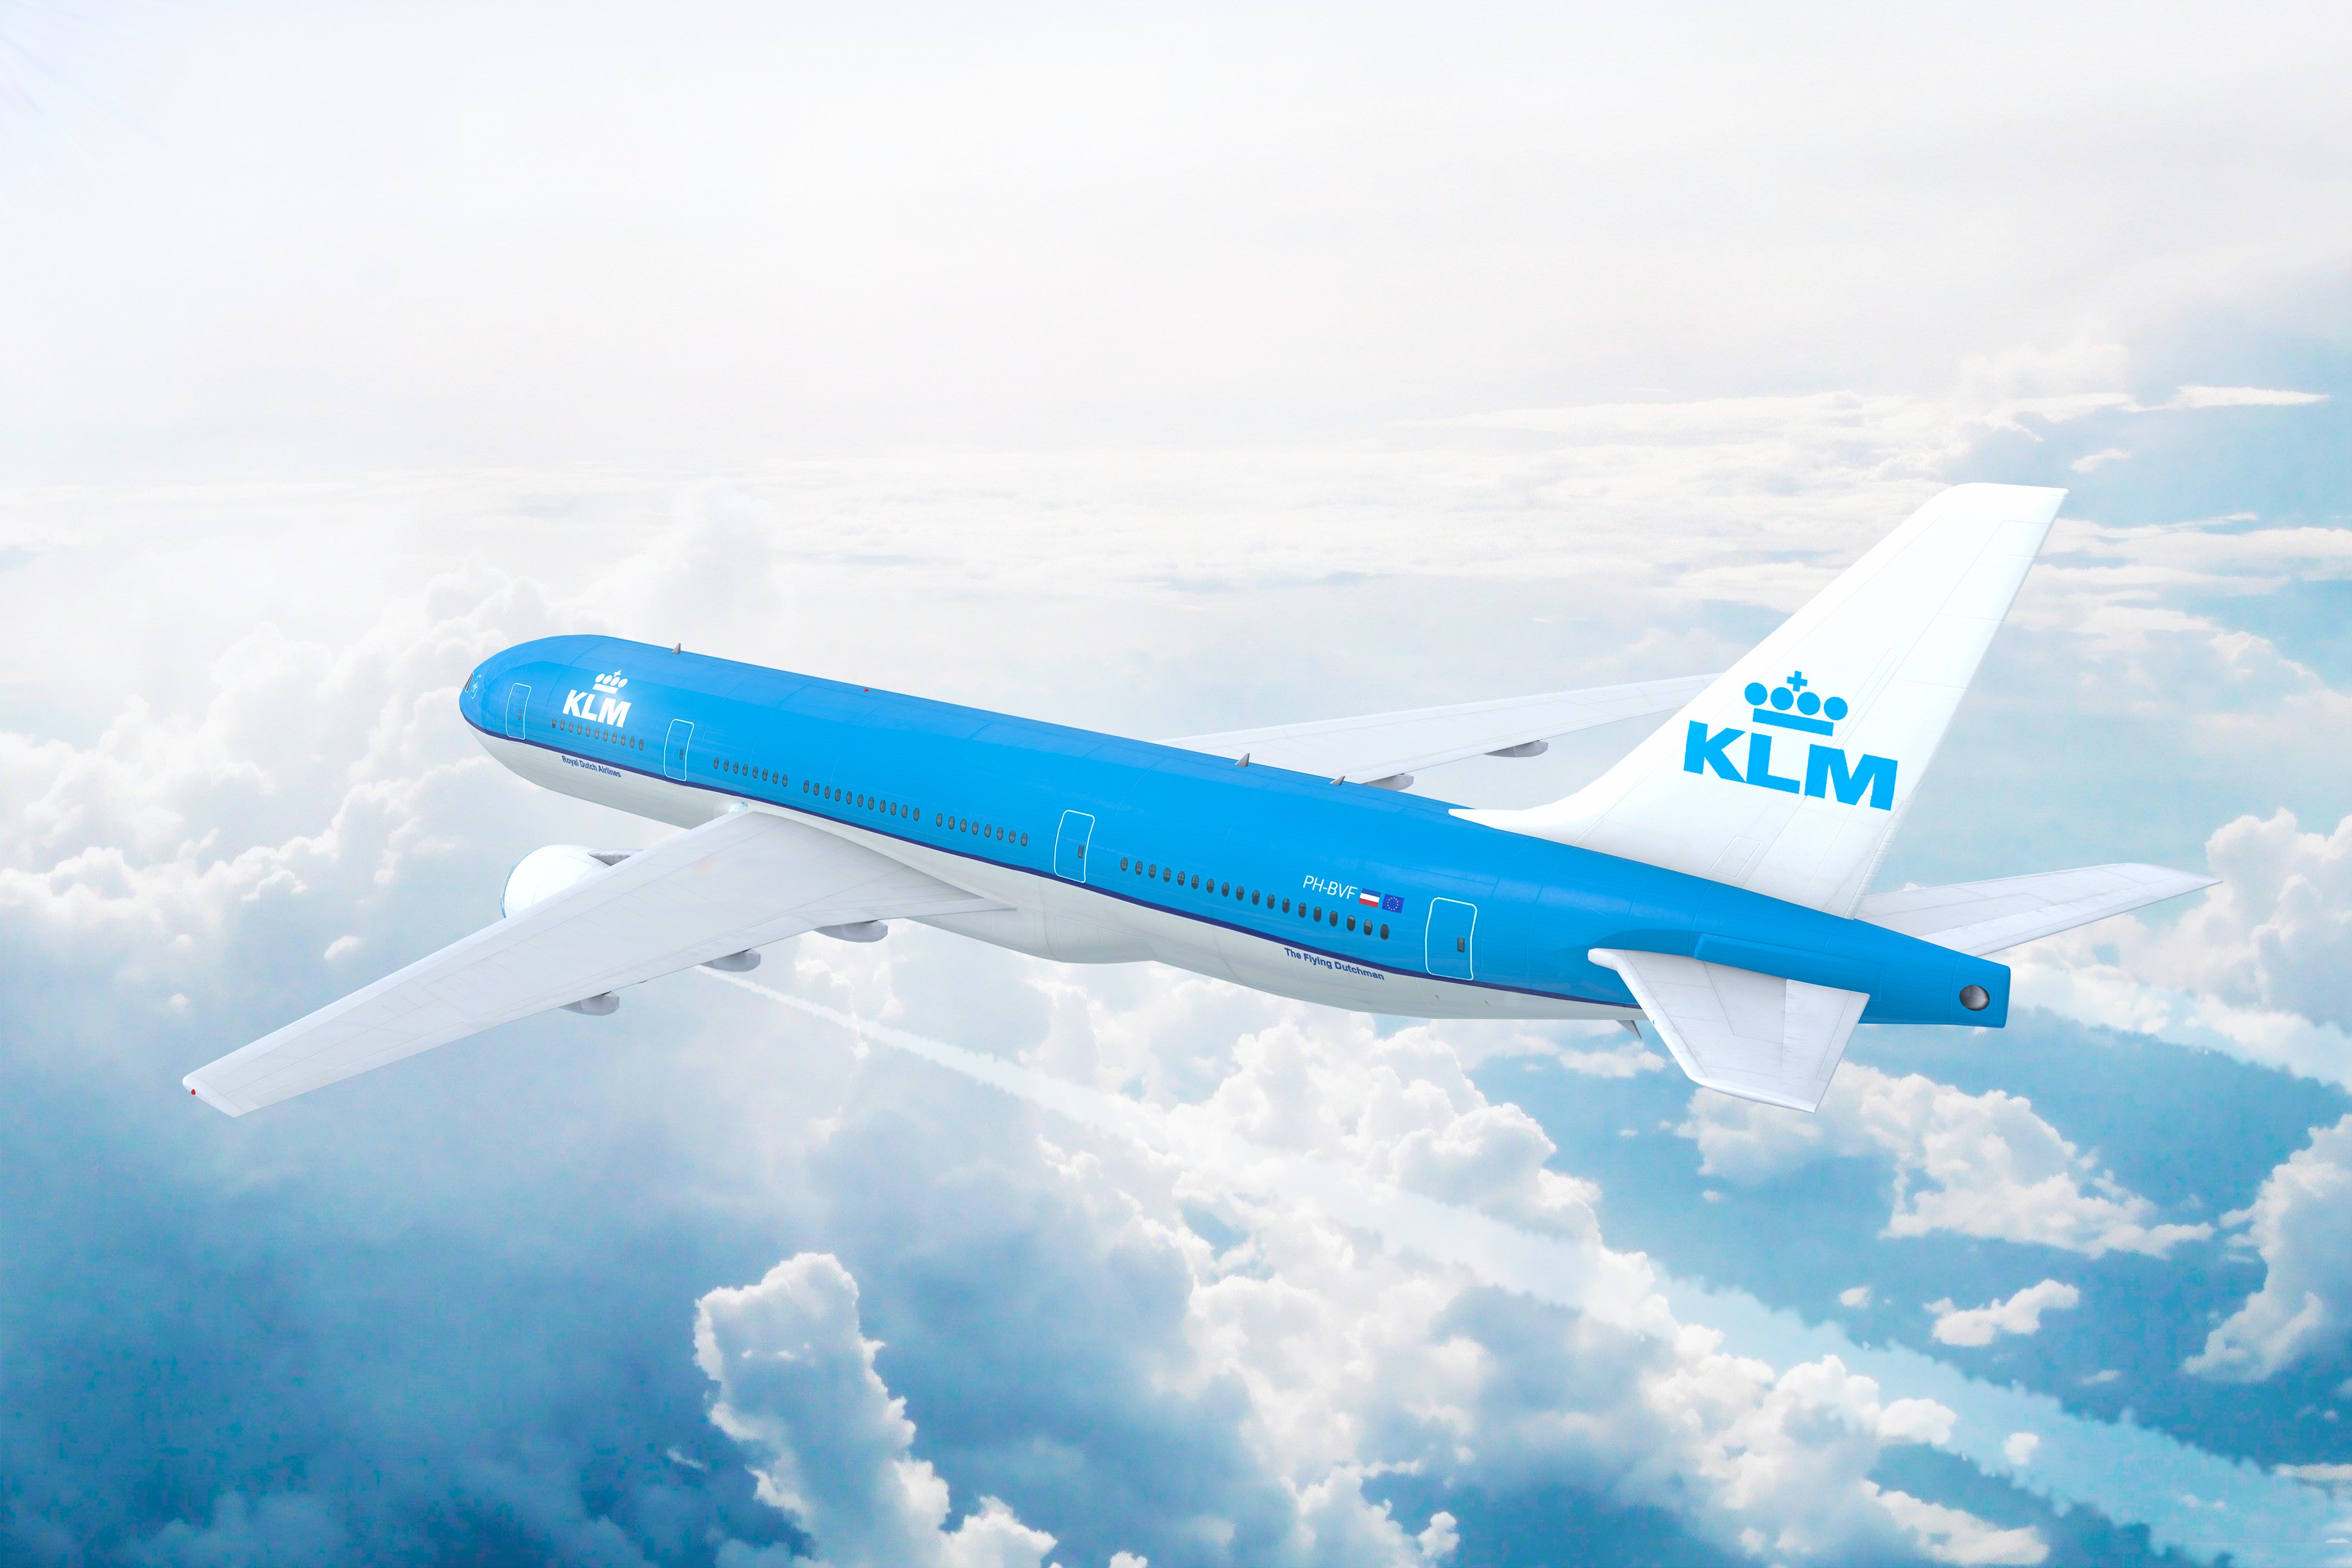 Aerial view of KLM Royal Dutch Airlines | Image: Shutterstock